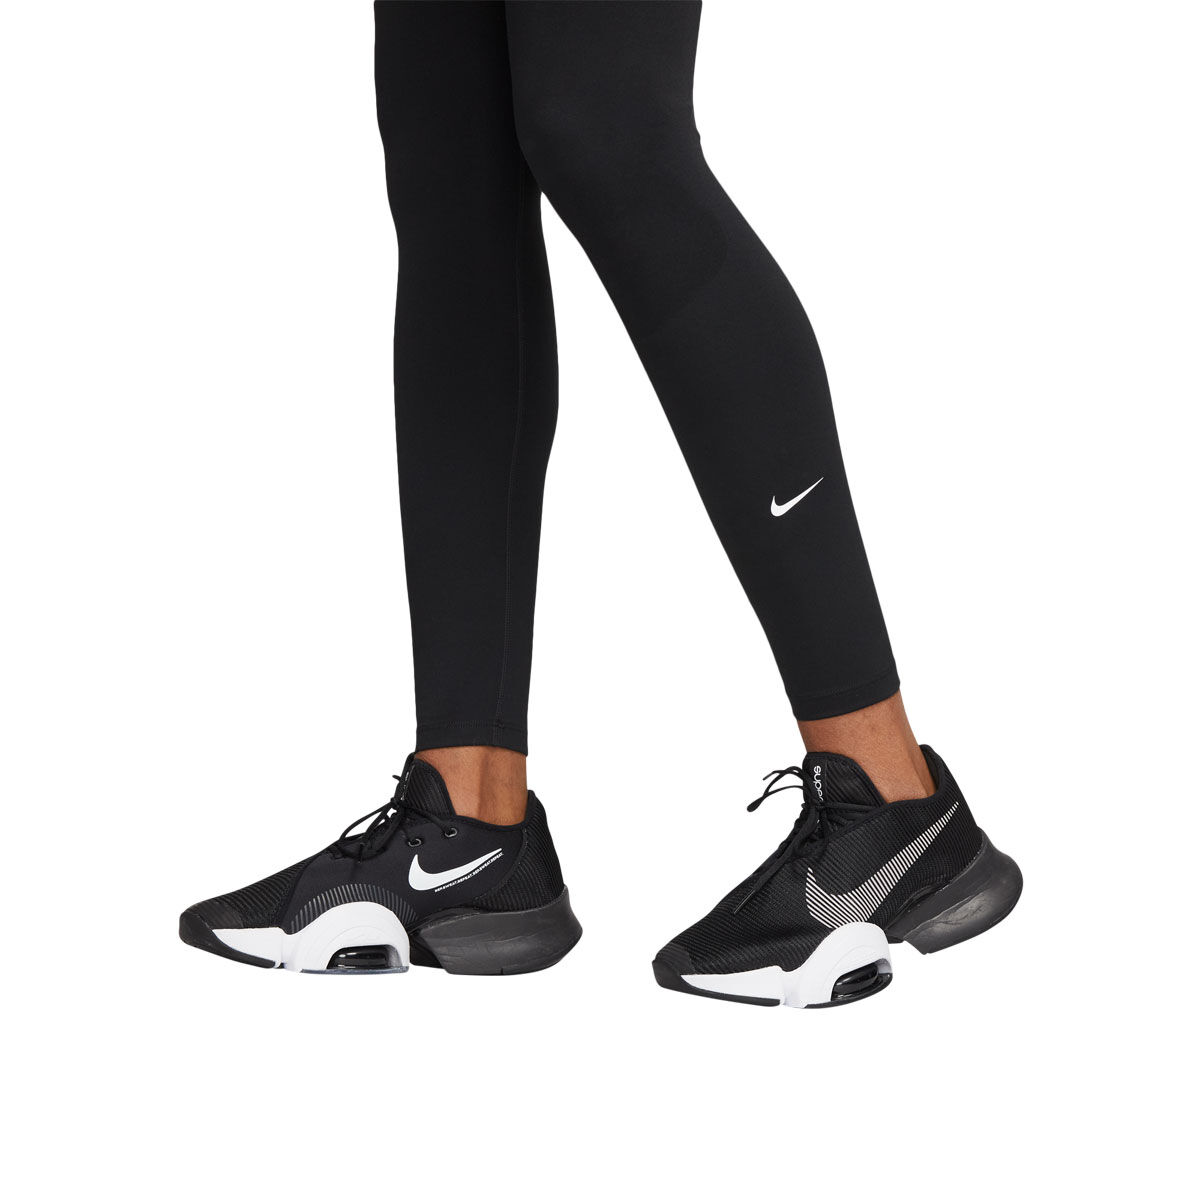 How To Find Squat-proof Leggings. Nike RO